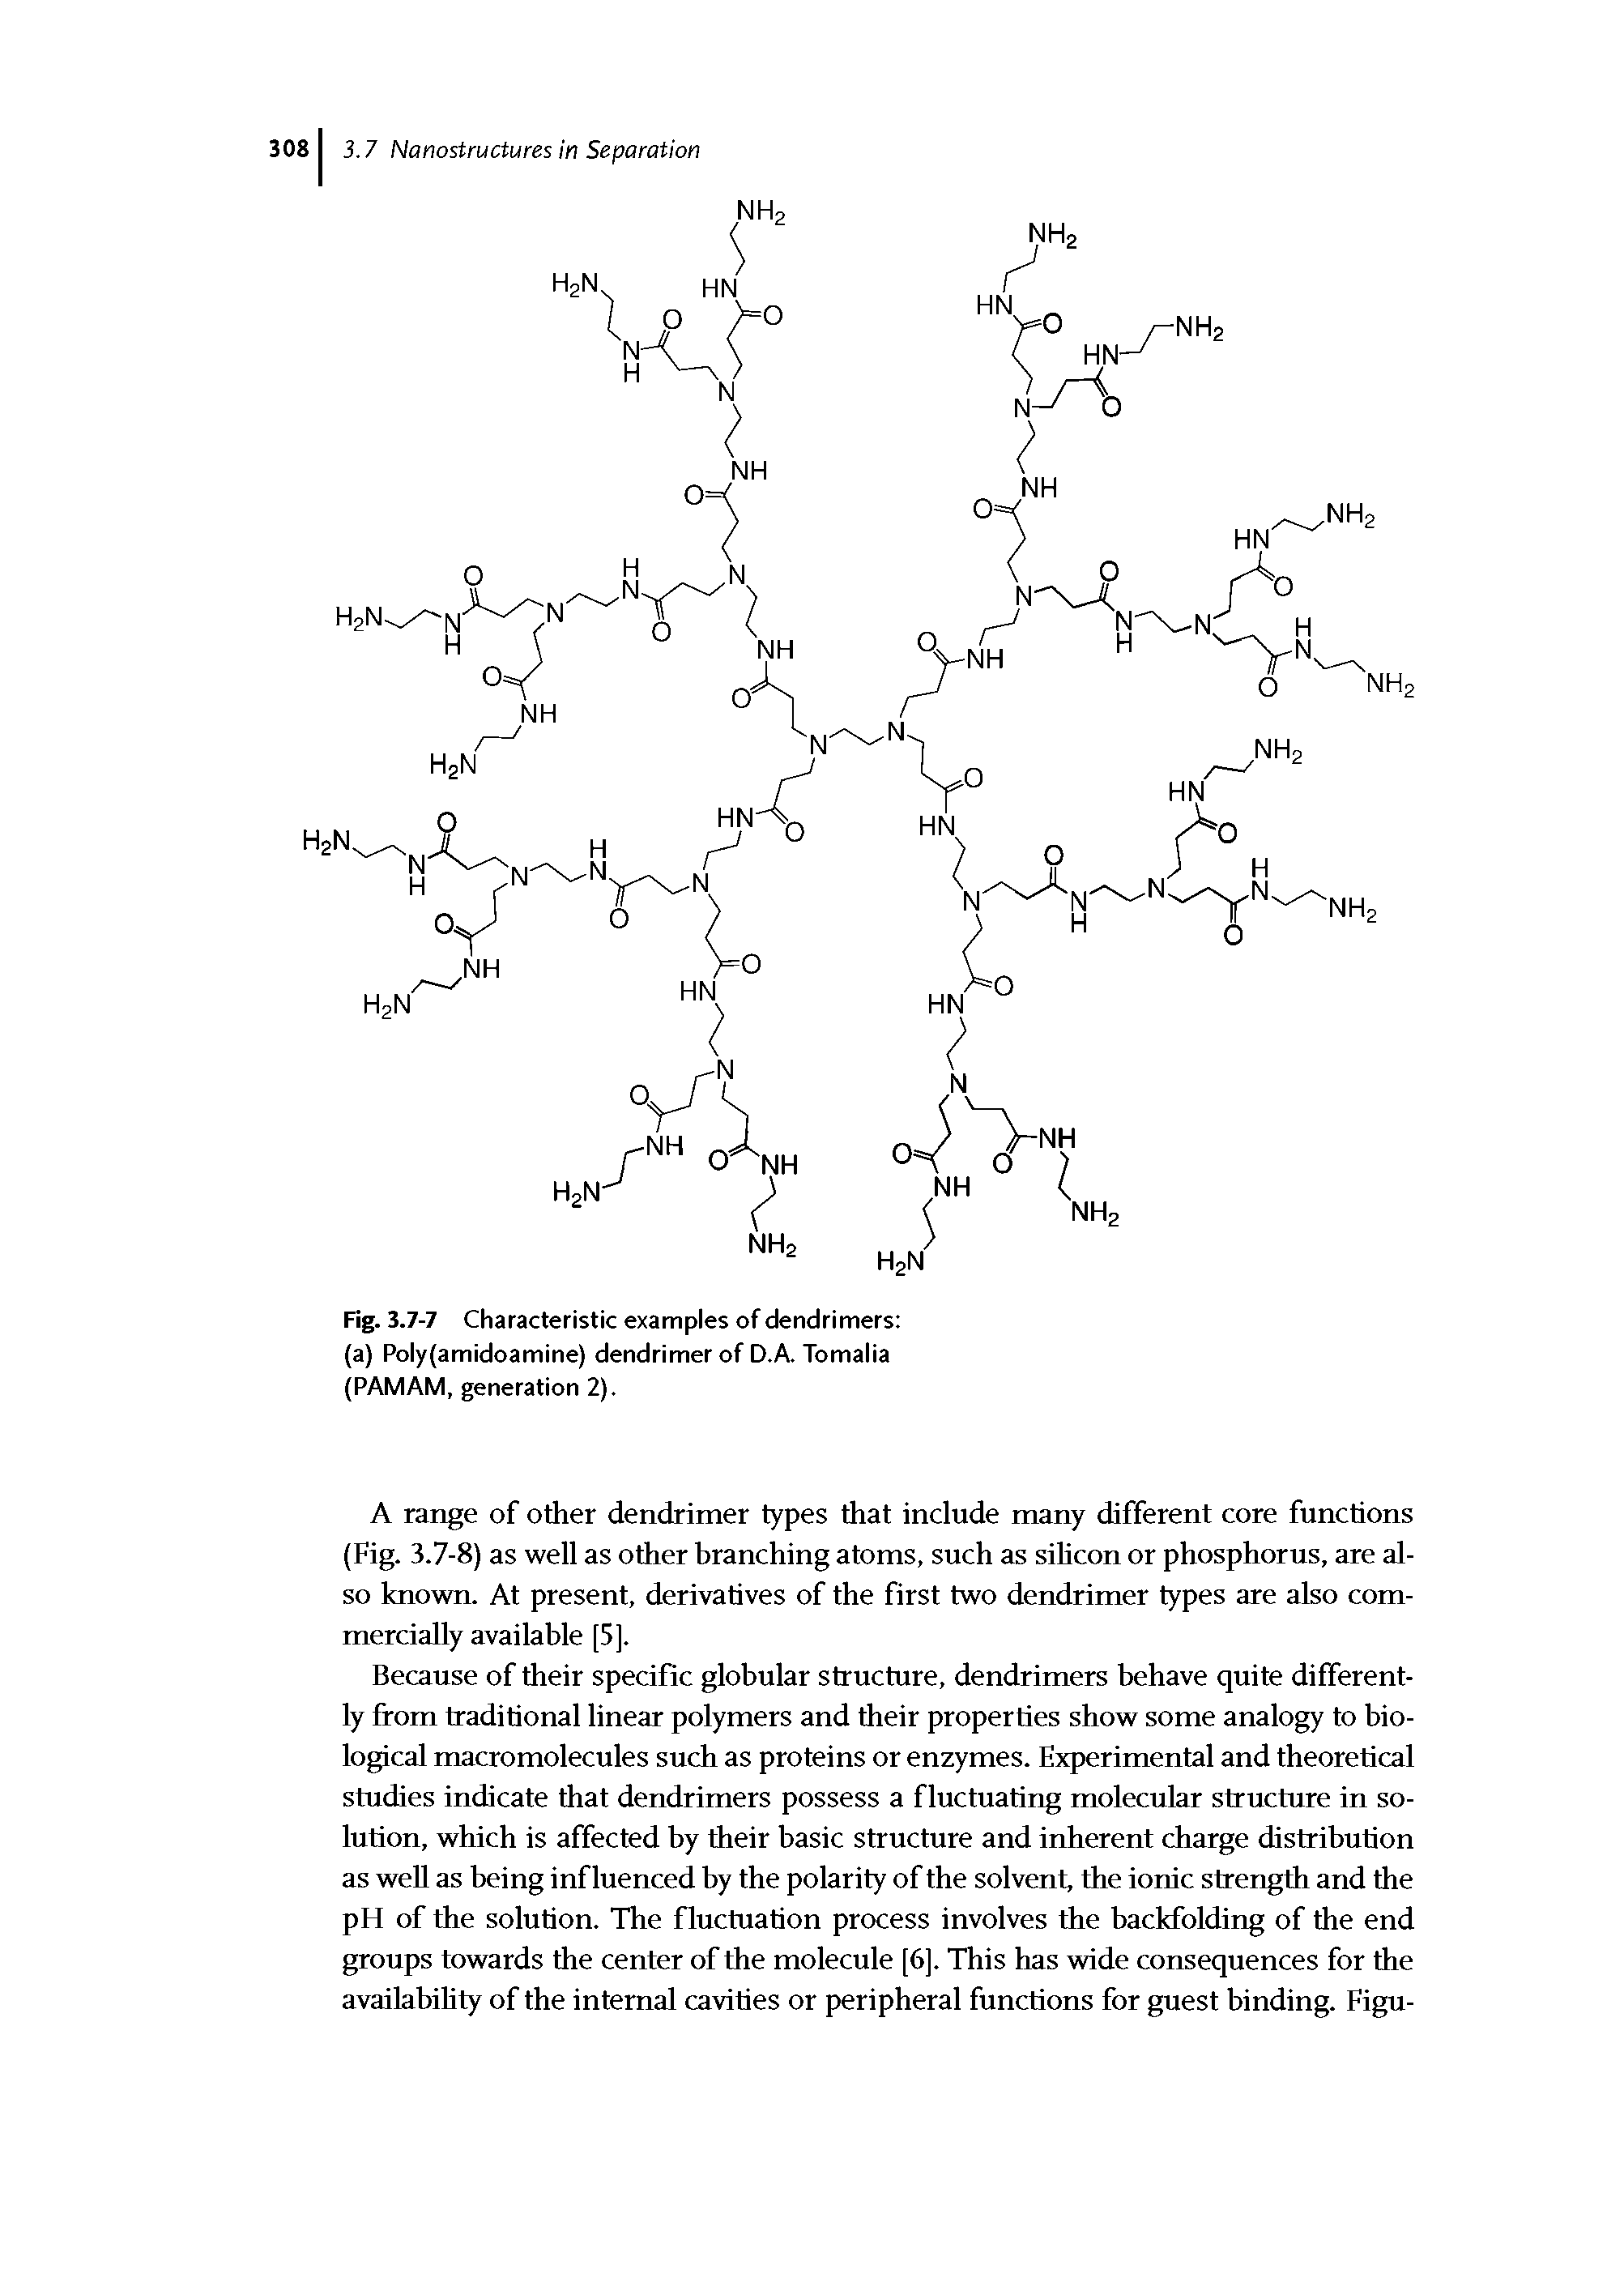 Fig. 3.7-7 Characteristic examples of dendrimers (a) Poly(amidoamine) dendrimer of D.A. Tomalia (PAMAM, generation 2).